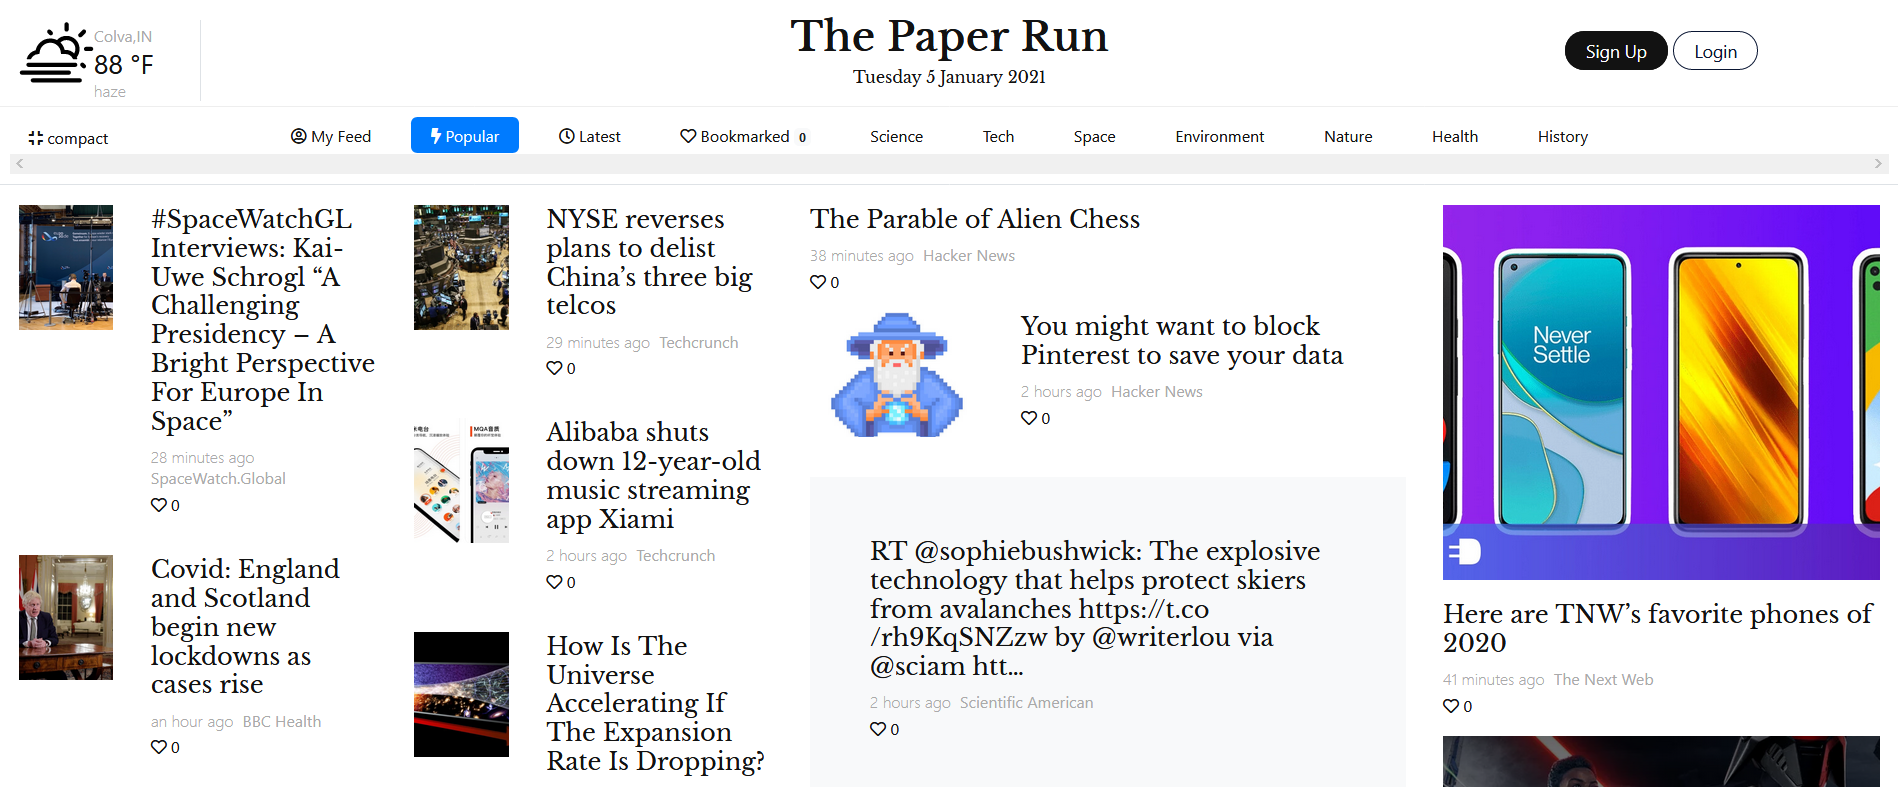 Find detailed information about Paper Run